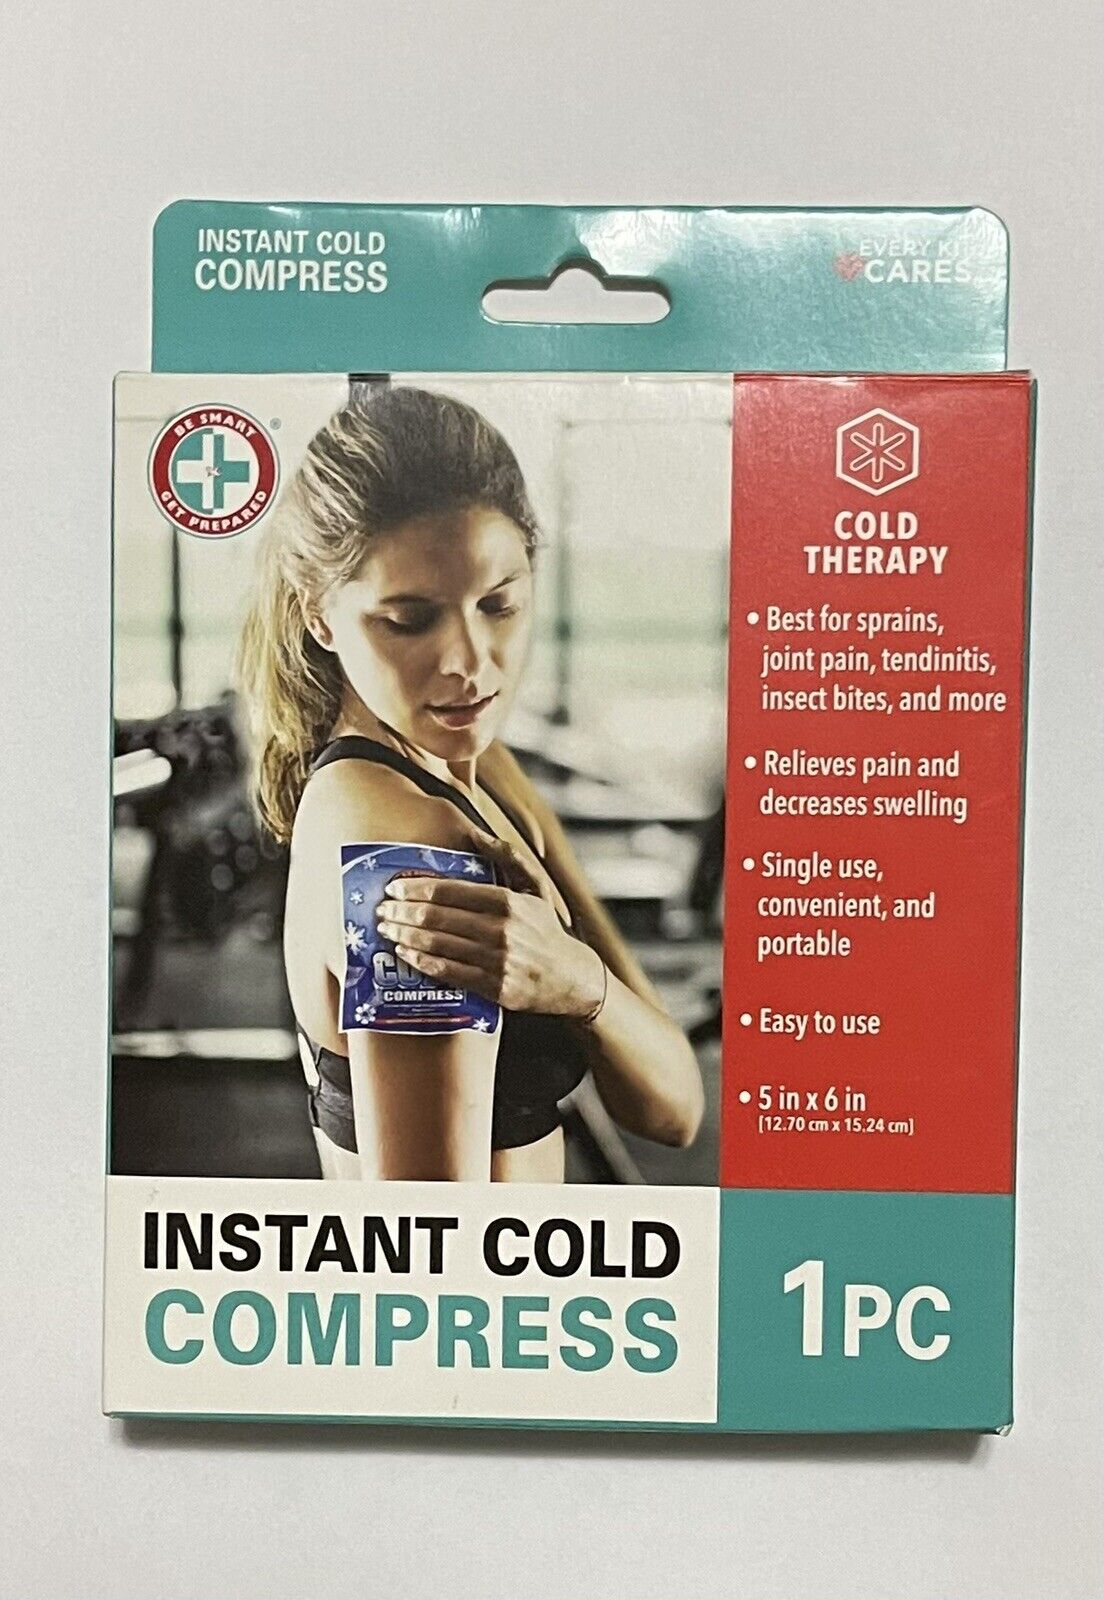 Every Kit Cares Instant Cold Compress 1PC for emergency situations by Amazon.